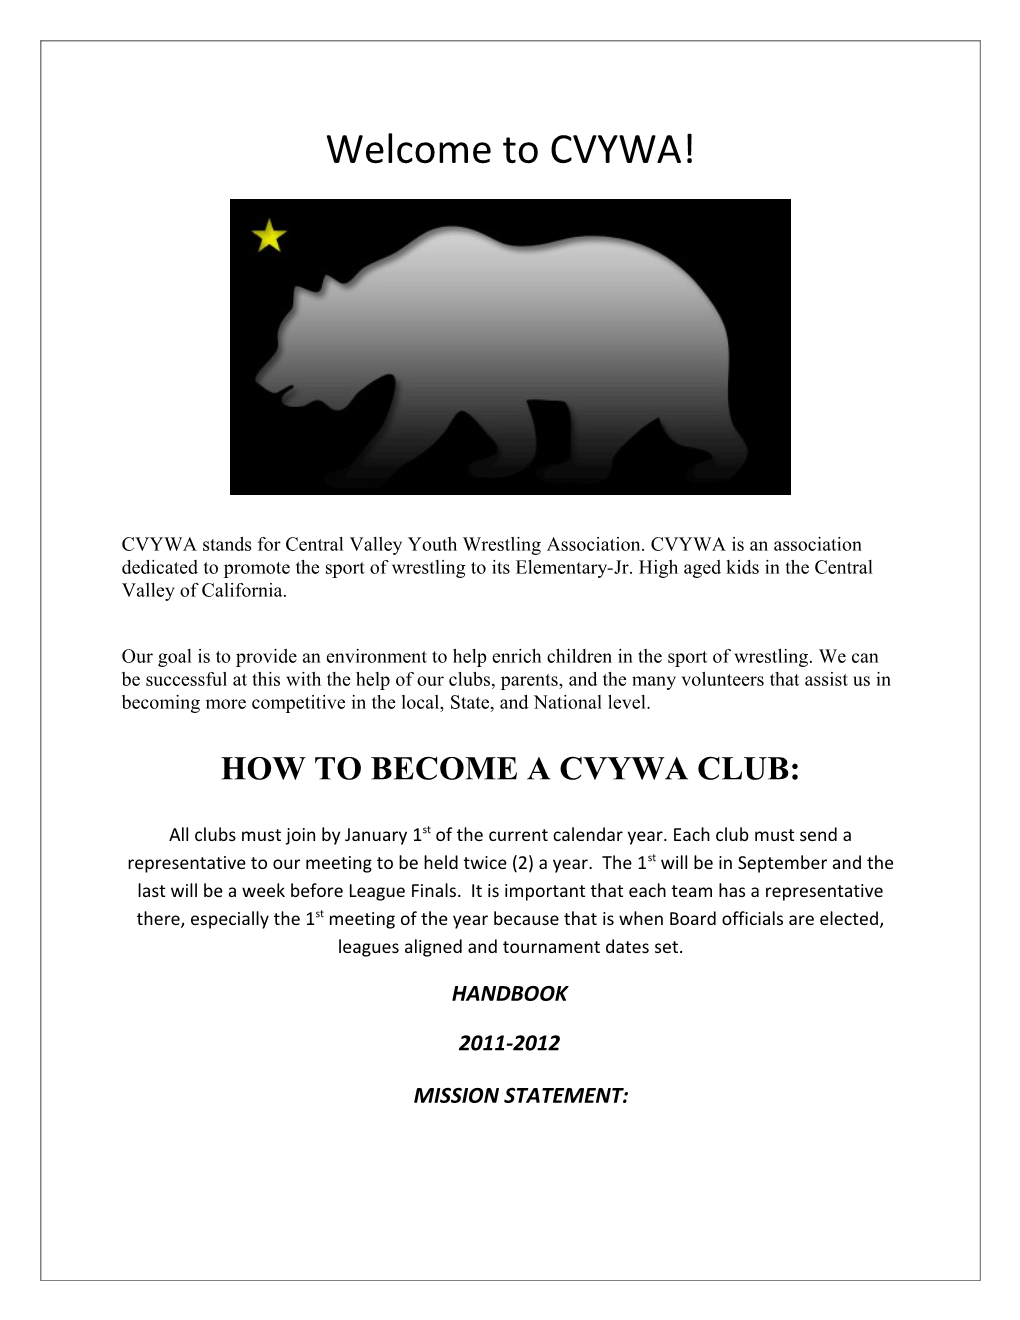 How to Become a Cvywa Club